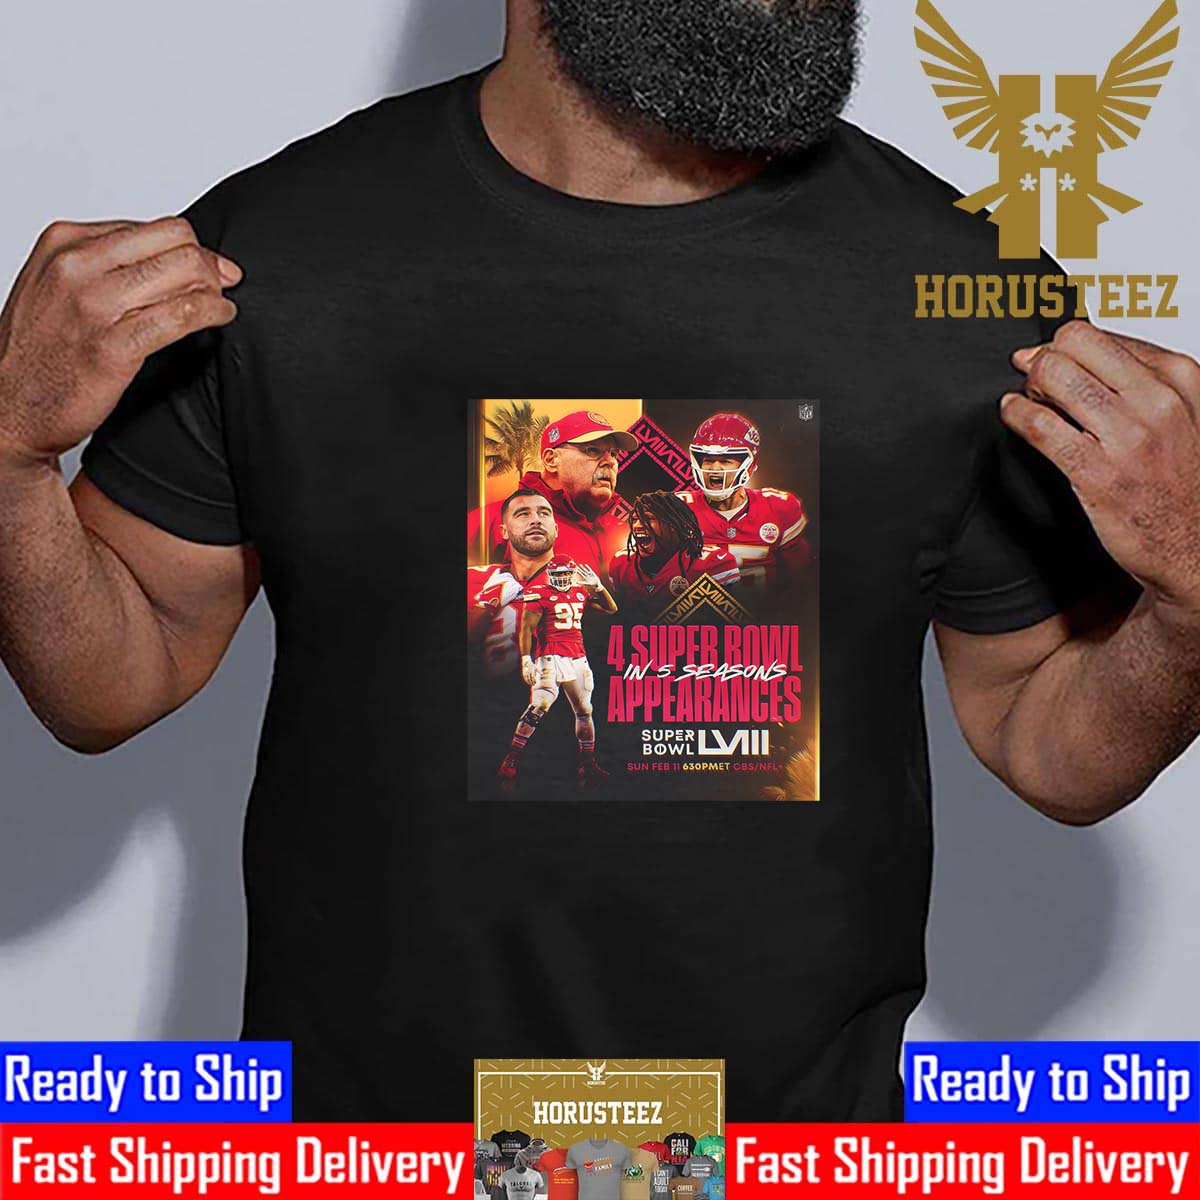 Super Bowl LVIII Is The 4 Super Bowl Appearances In 5 Seasons For Kansas City Chiefs Classic T-Shirt